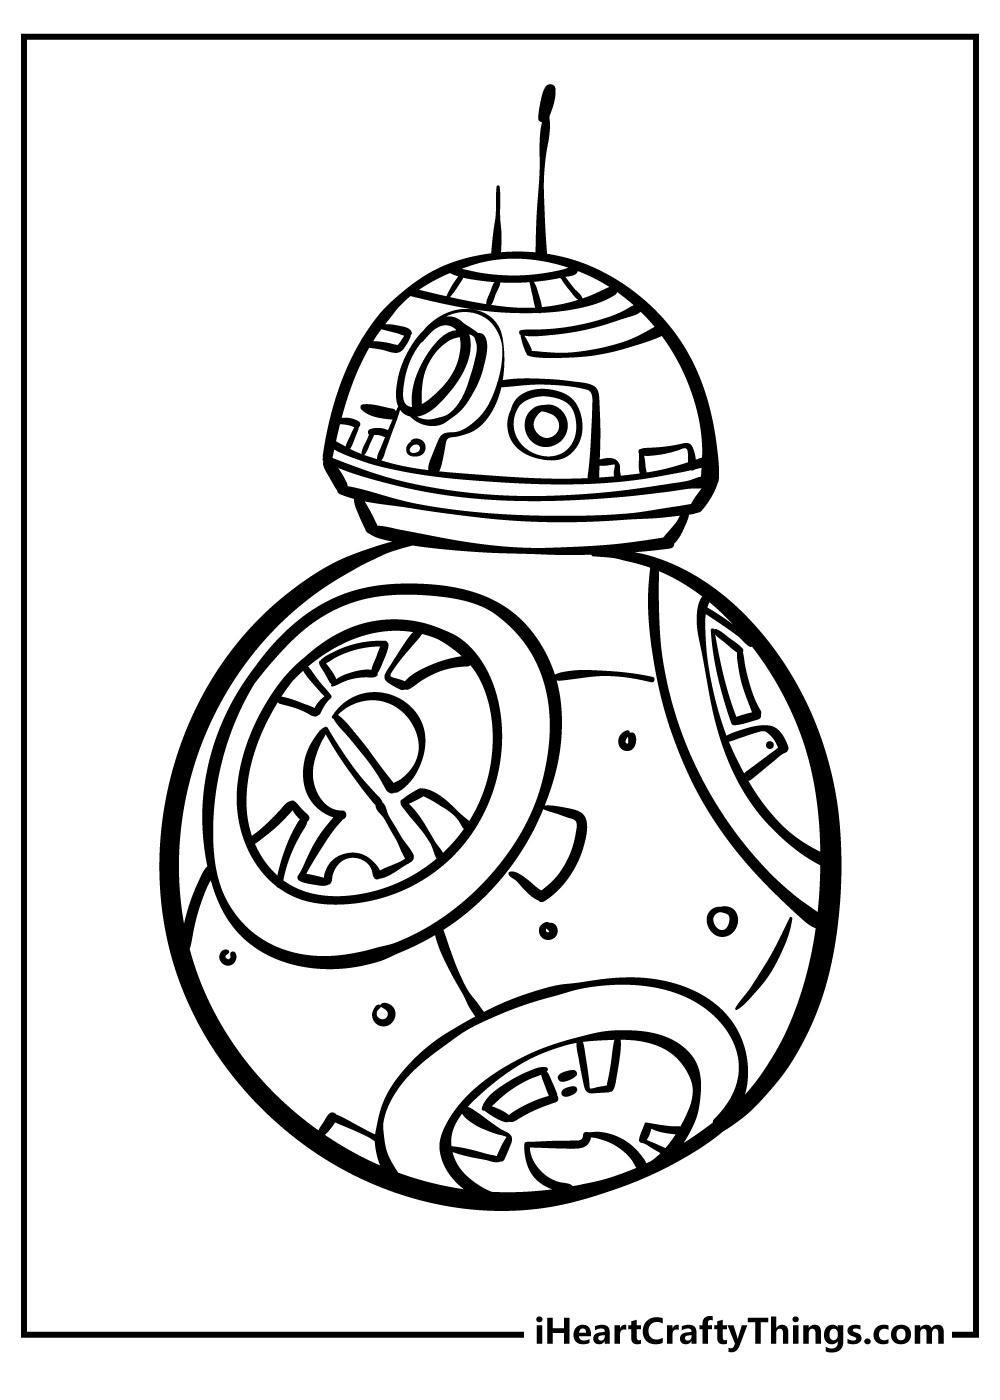 Star Wars Coloring Sheet for children free download